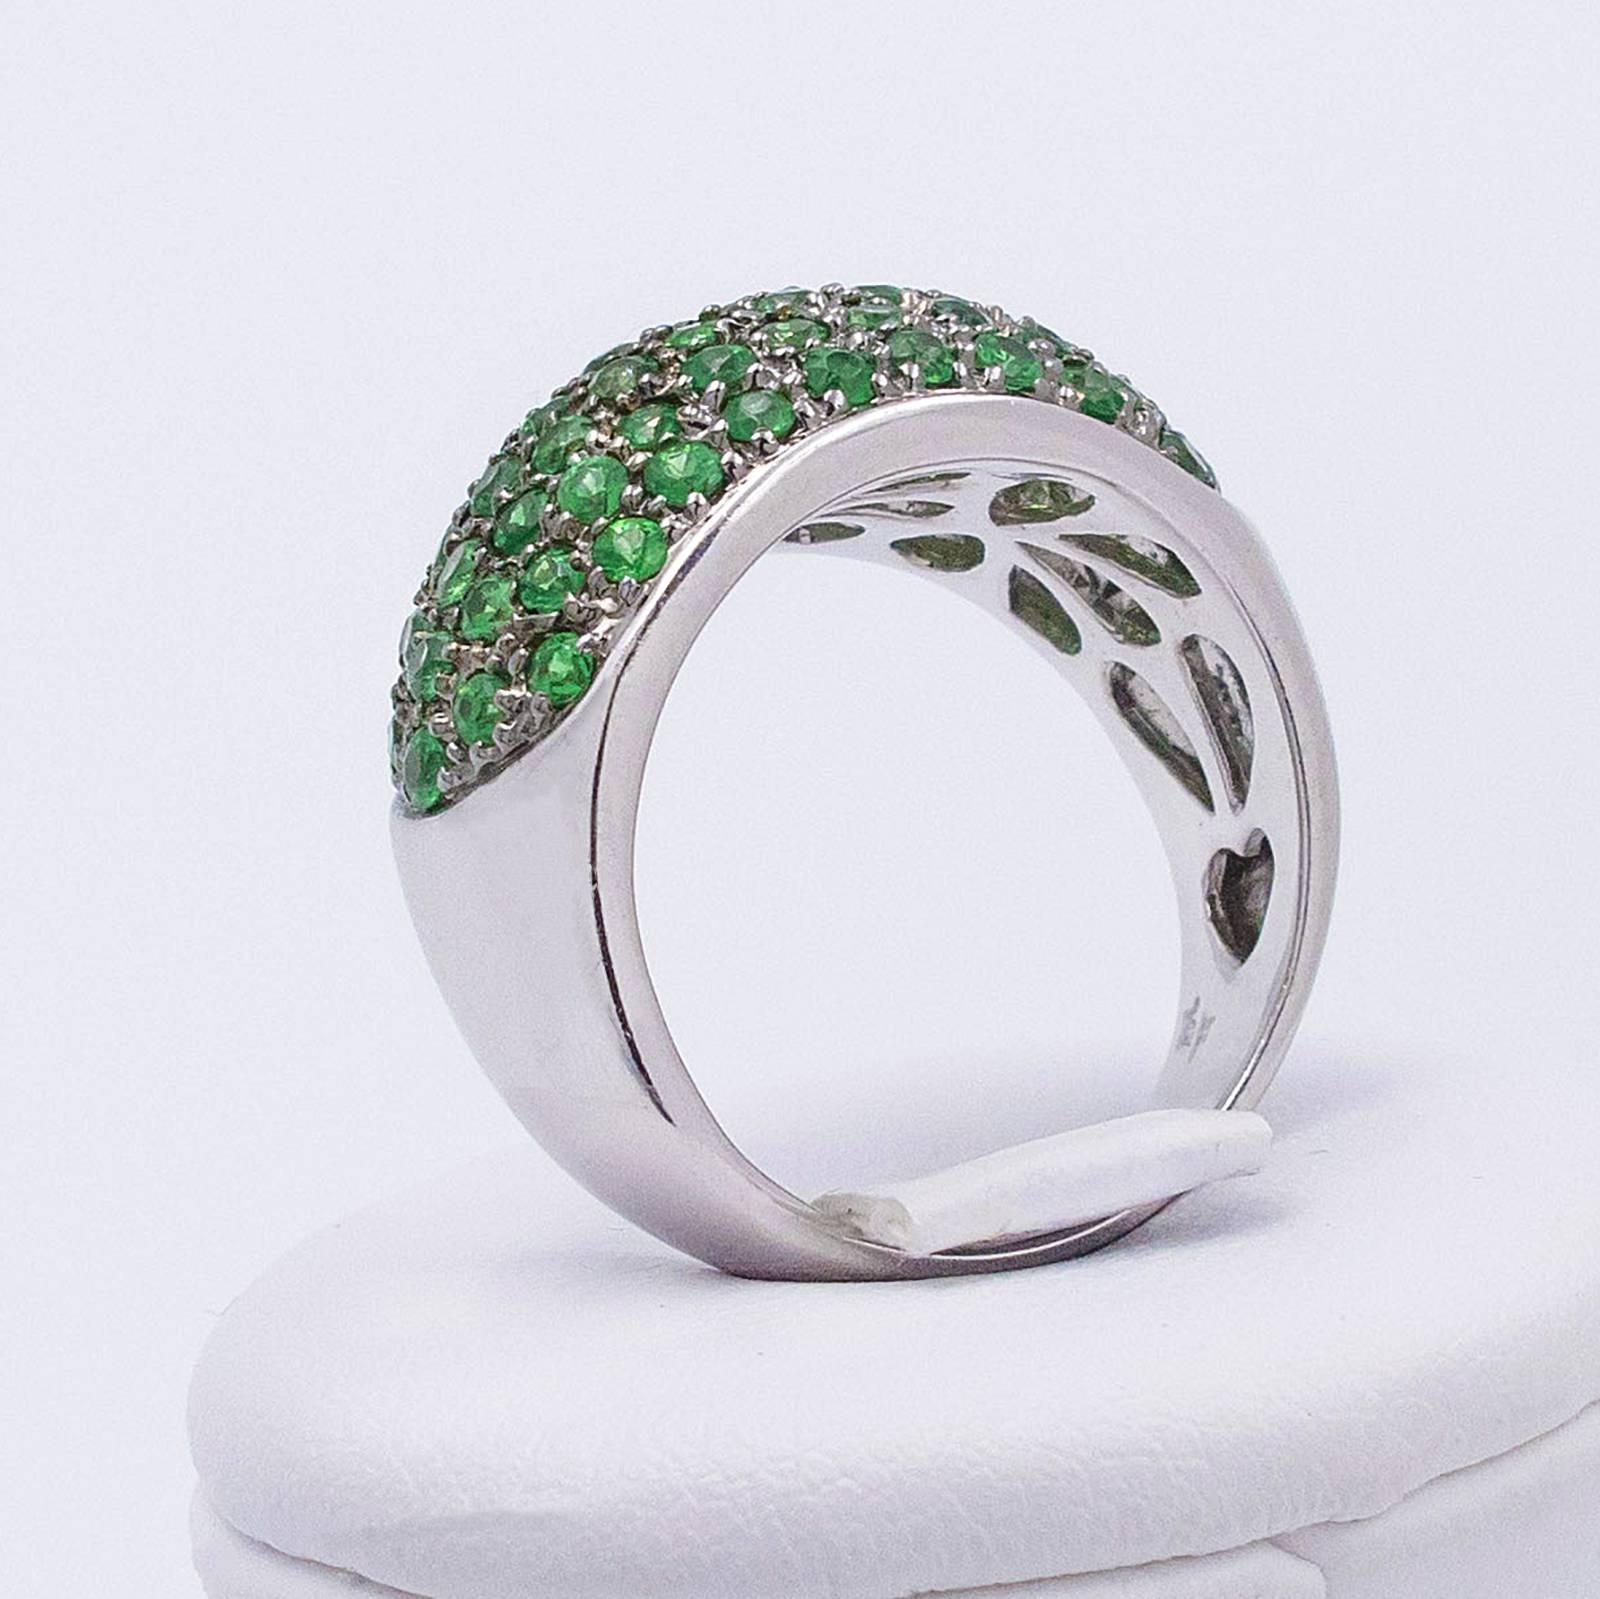 2.12 Carat Tsavorite Garnet White Gold Band Ring In Excellent Condition For Sale In Toronto, Ontario